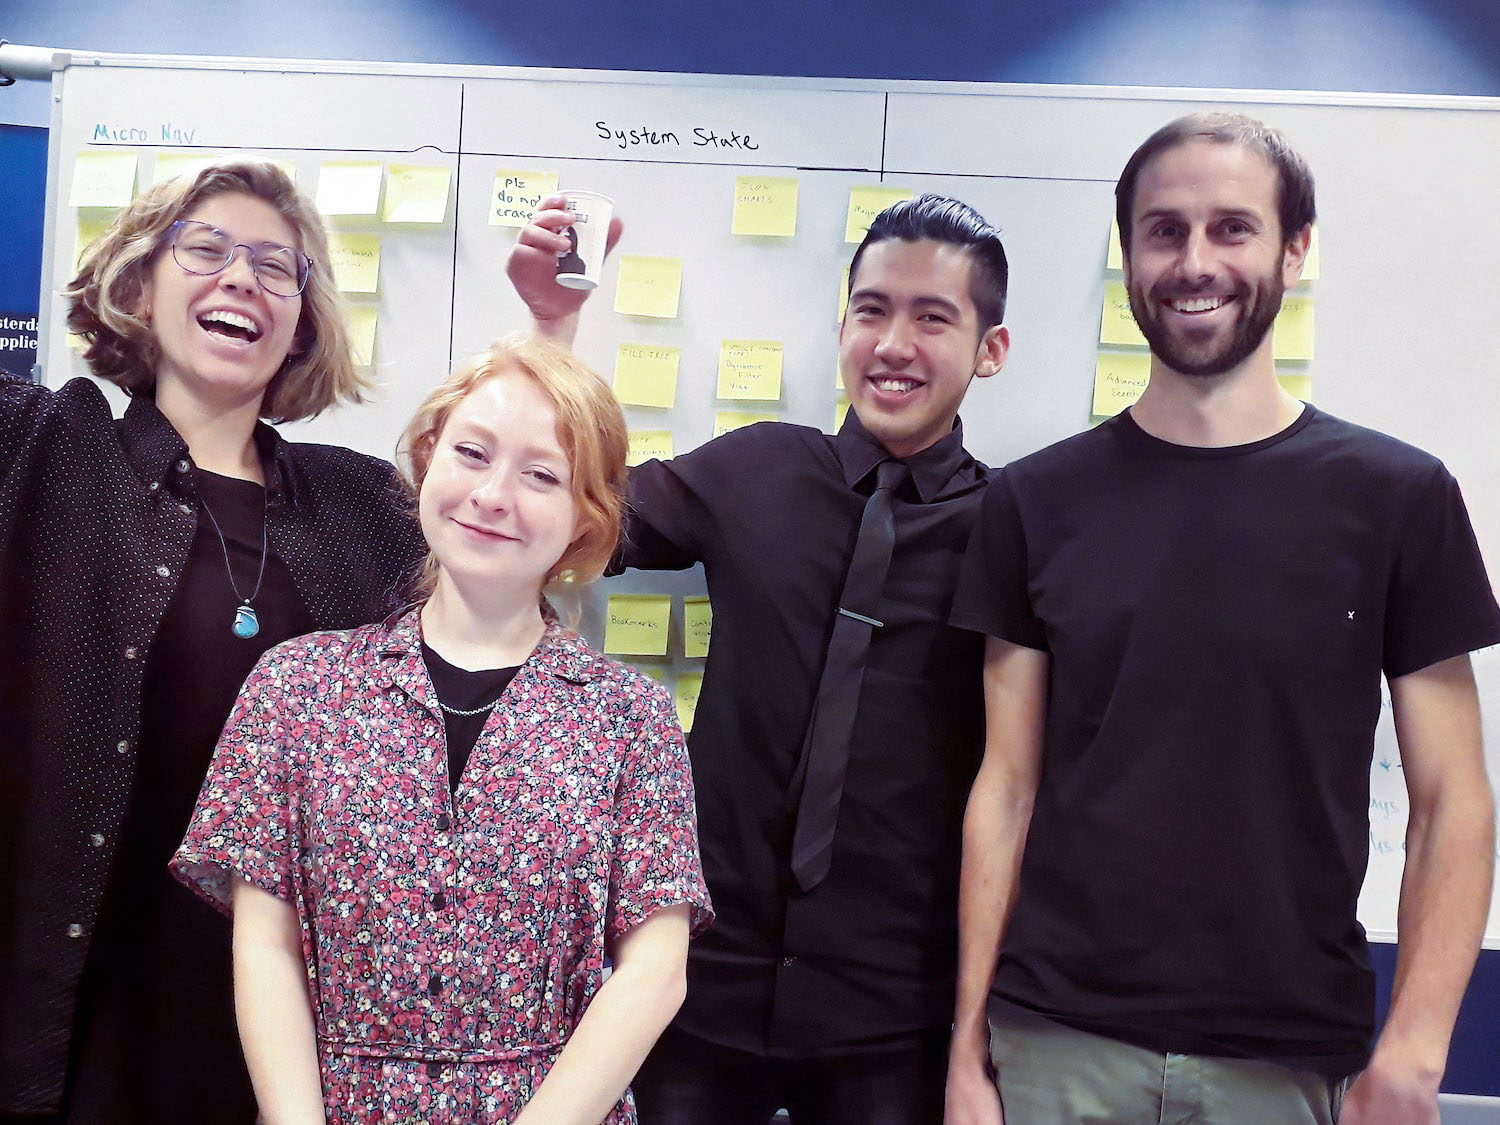 A photo of four members of the Sphere design team (two men and two women) standing in front of a white board with sticky notes on it.